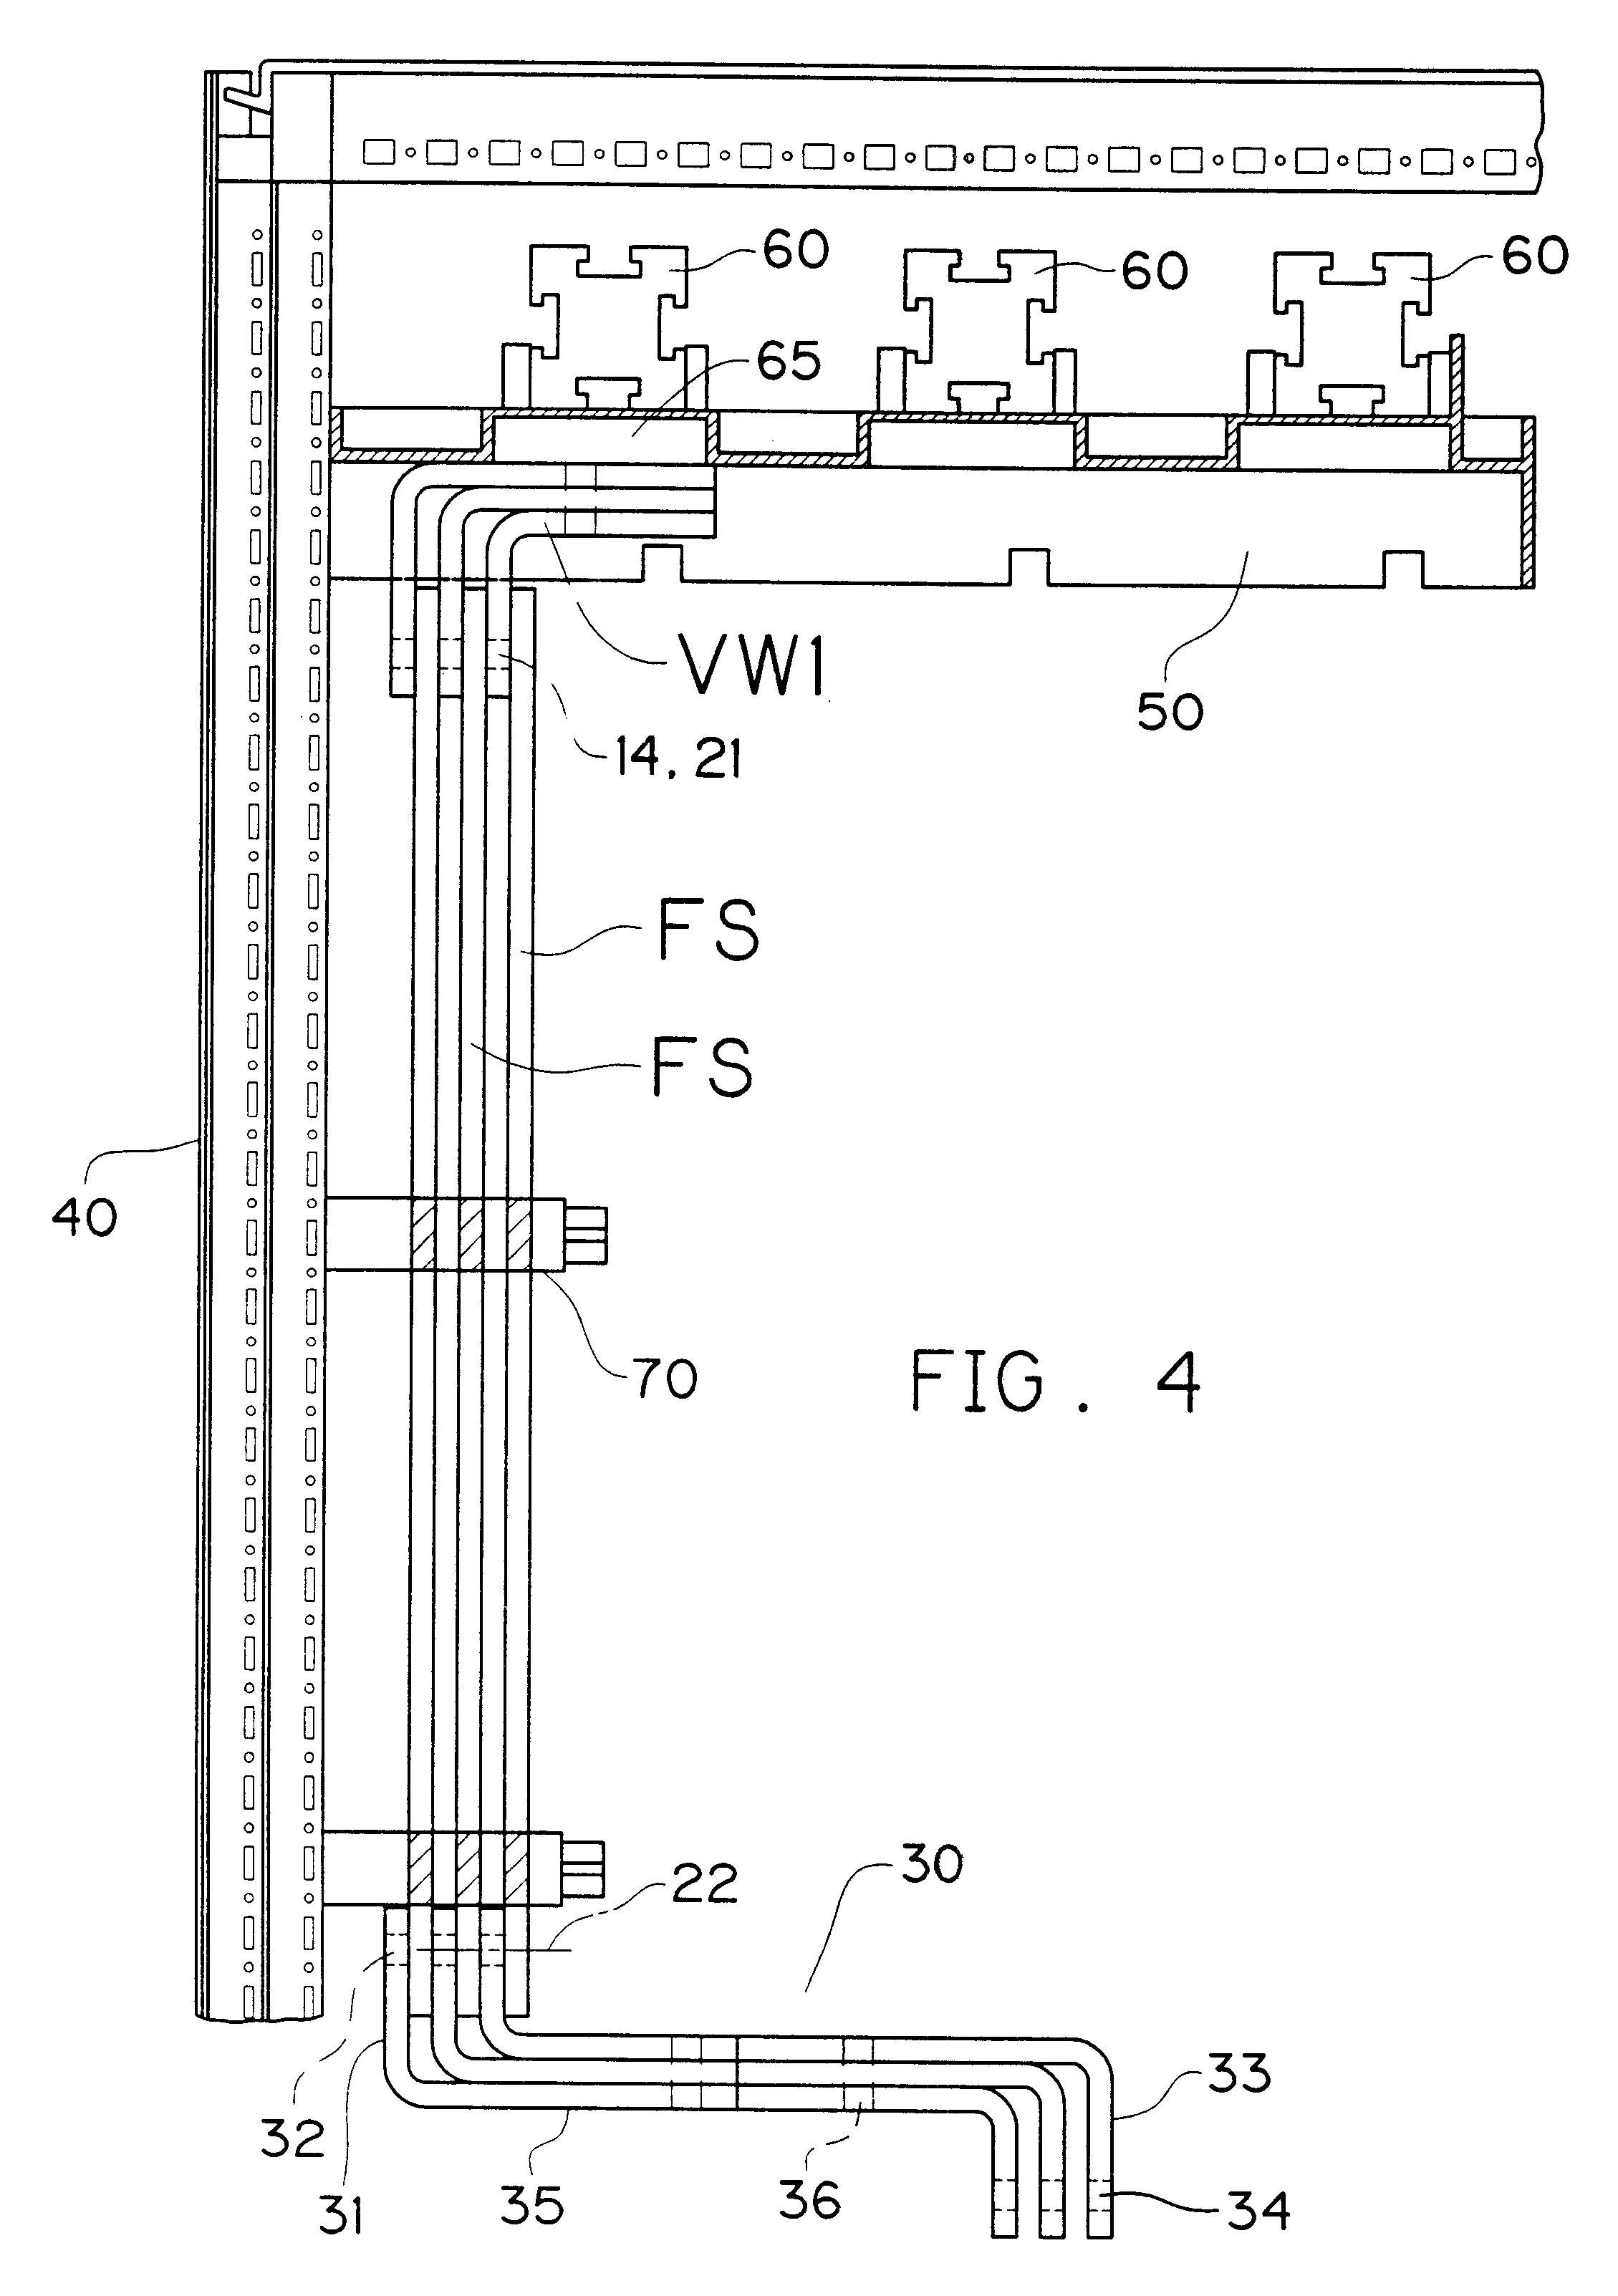 Kit for a bus bar system for connecting bus bars with connectors of an electric installation device